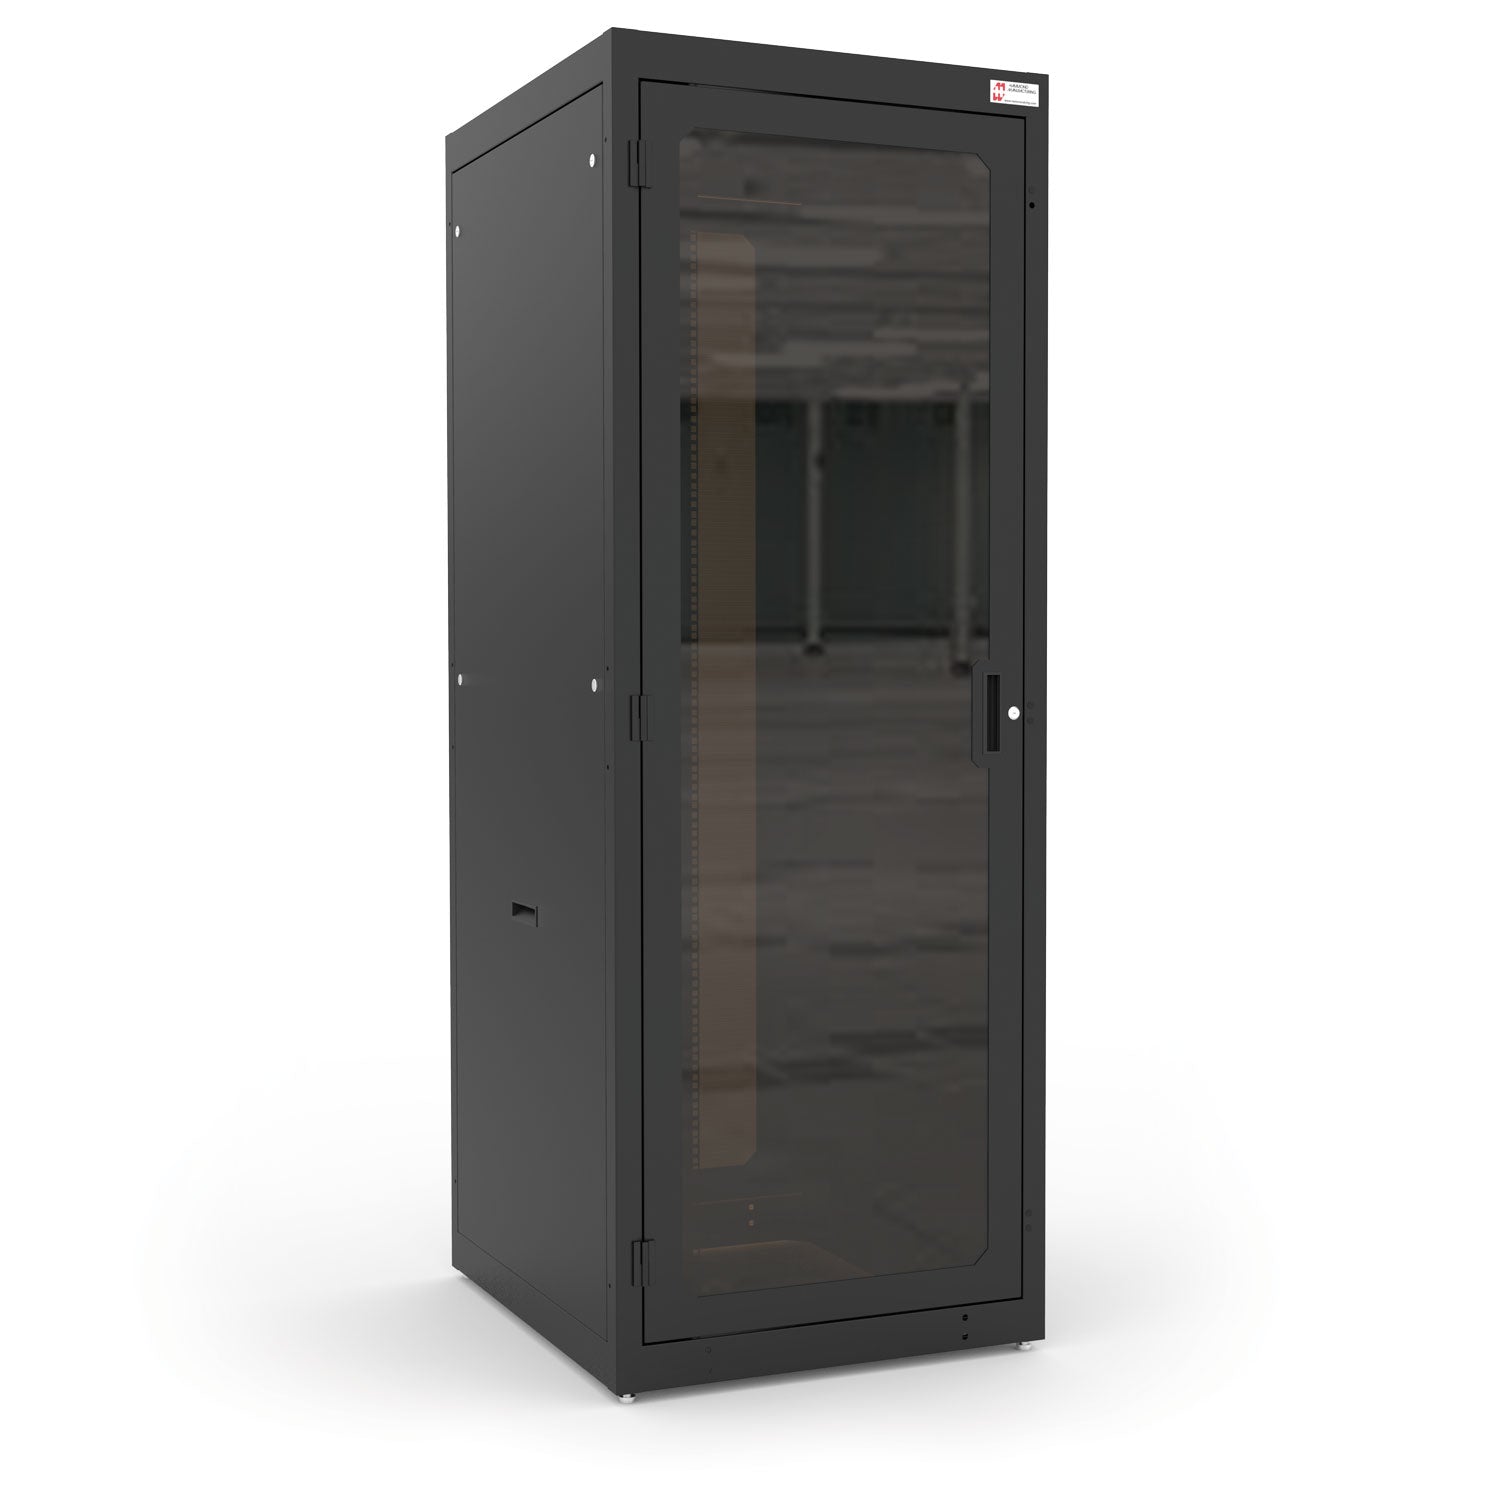 Server Rack Cabinet C4RR Series  UL 2416 Rated 3000 lbs|1361 kg Weight Capacity